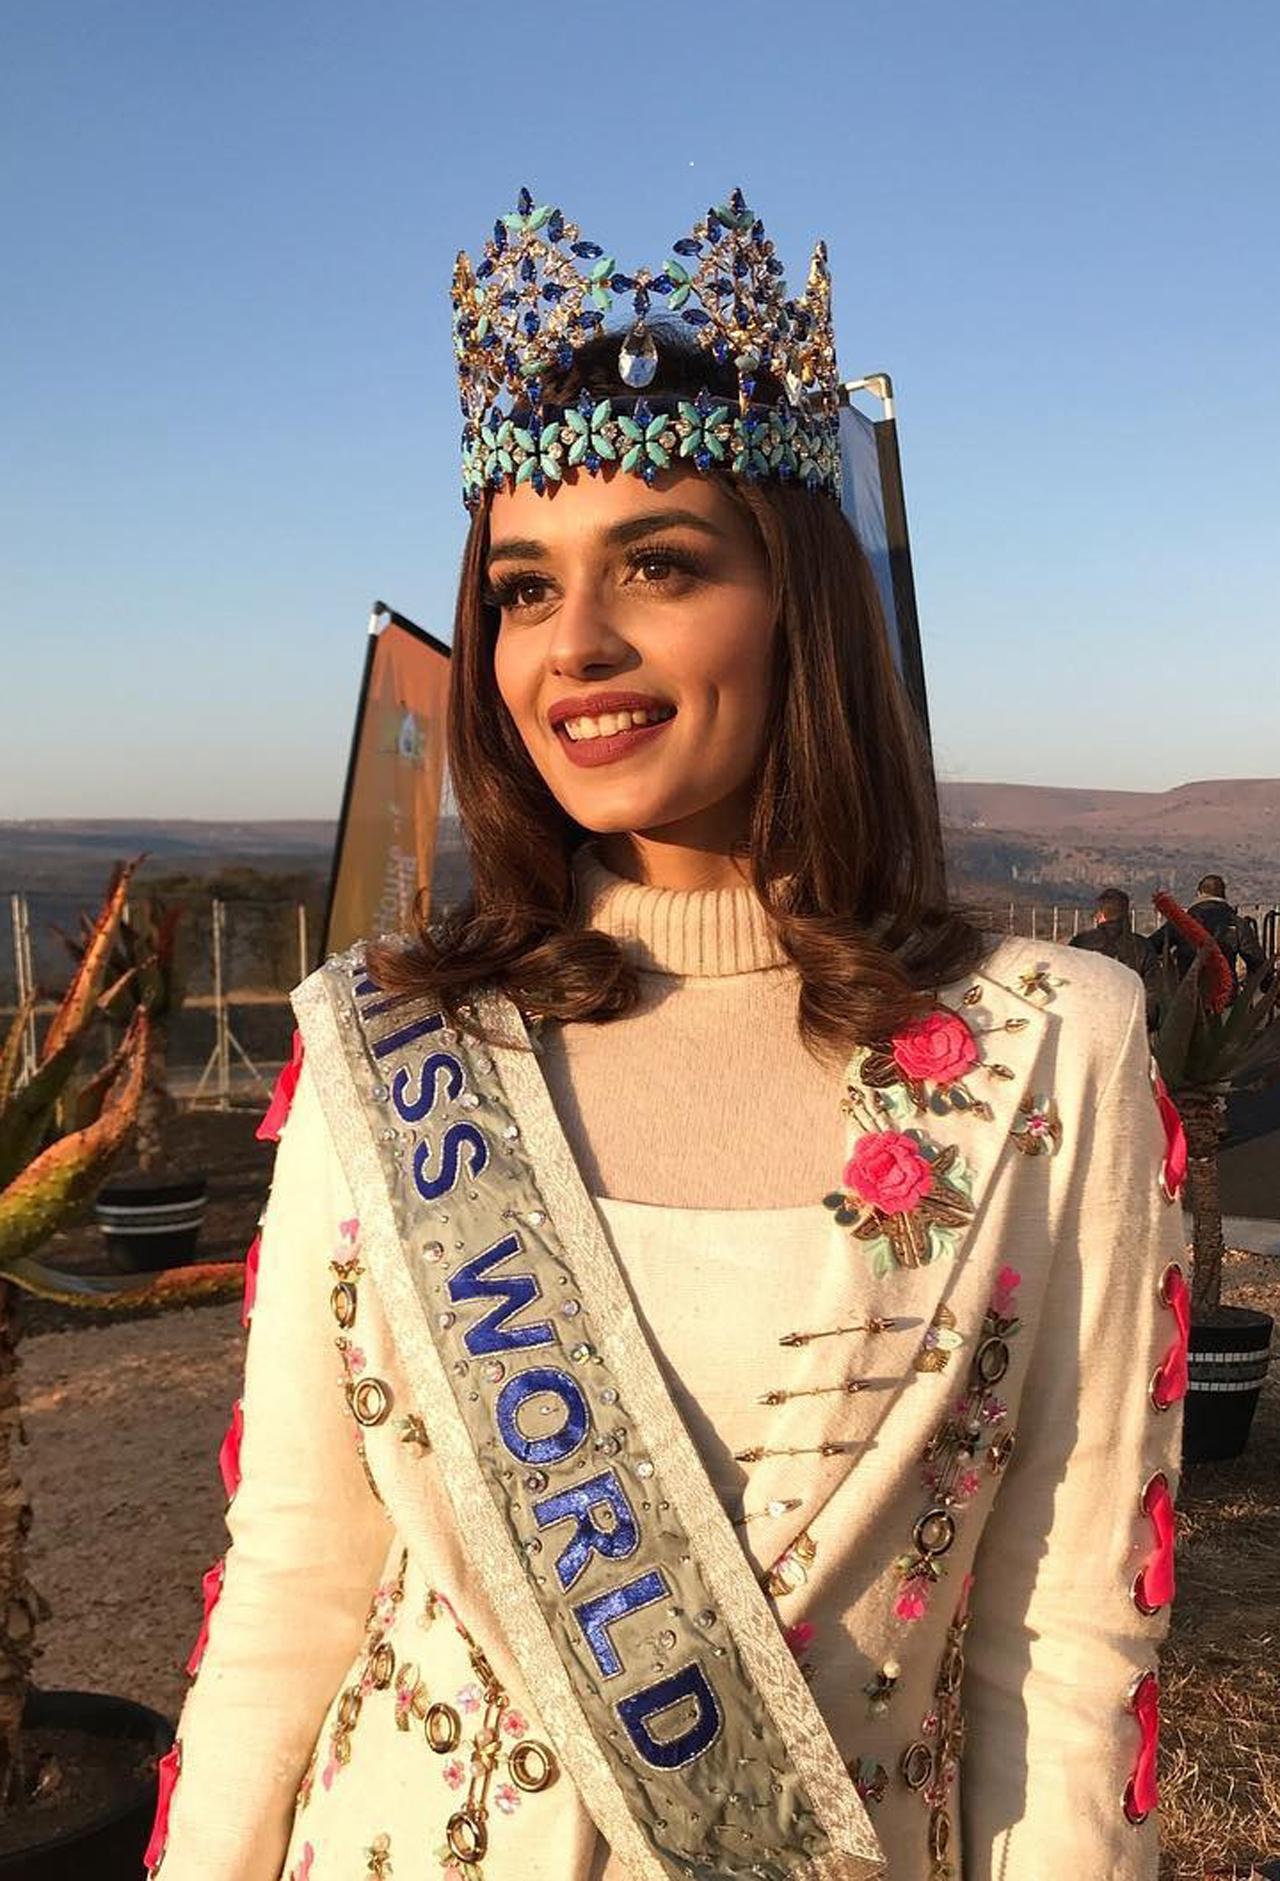 South Africa
Manushi flaunts her Miss World crown with elan in this picture clicked in South Africa as she flashes her beautiful smile. She writes, 